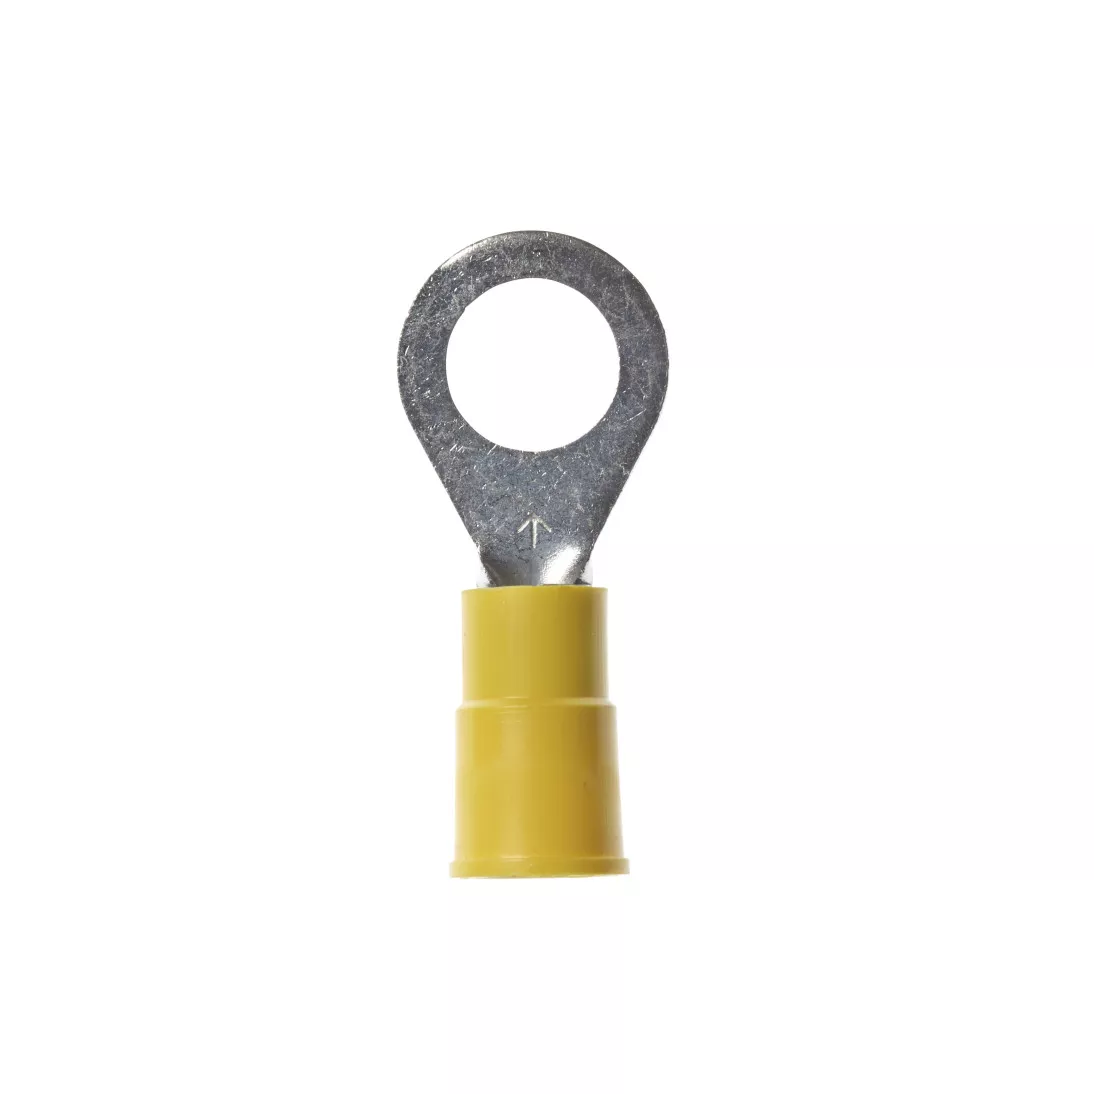 3M™ Scotchlok™ Ring Vinyl Insulated, 50/bottle, MV10-516R/SX,
standard-style ring tongue fits around the stud, 500/Case